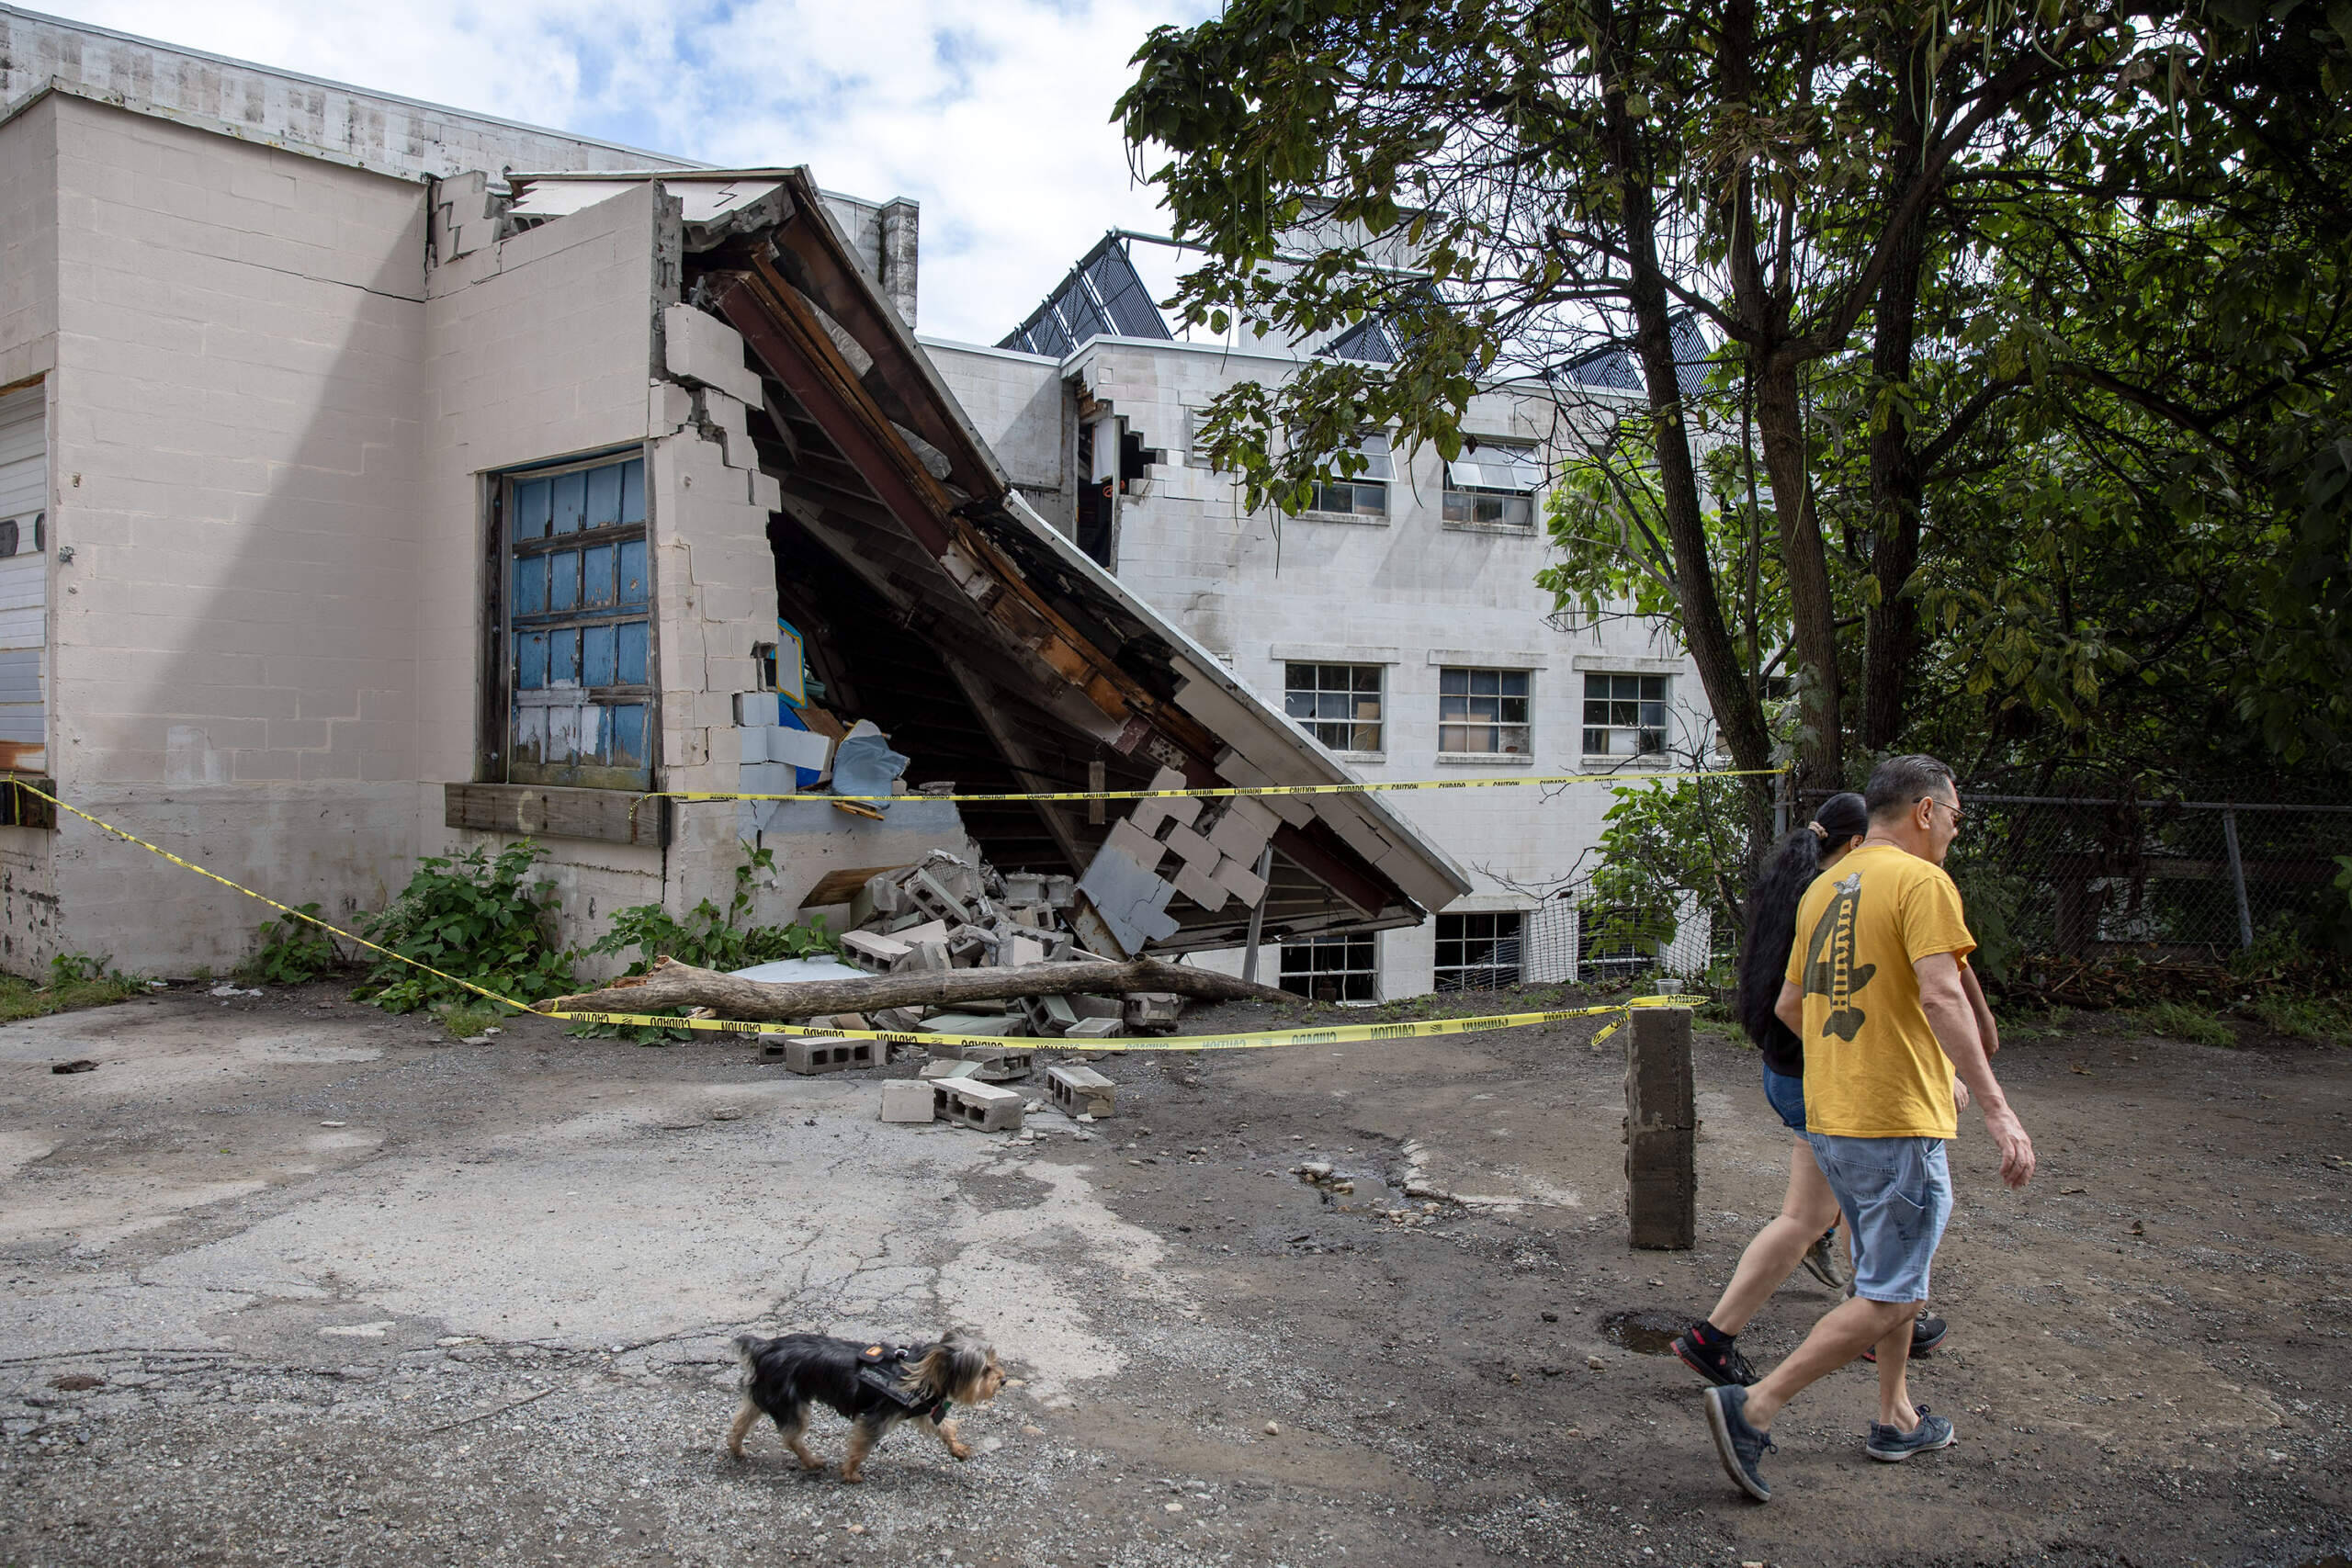 A building on Water Street by Monoosnoc Brook in Leominster, collapsed when the brook flooded after 11 inches of rain fell on city. (Robin Lubbock/WBUR)